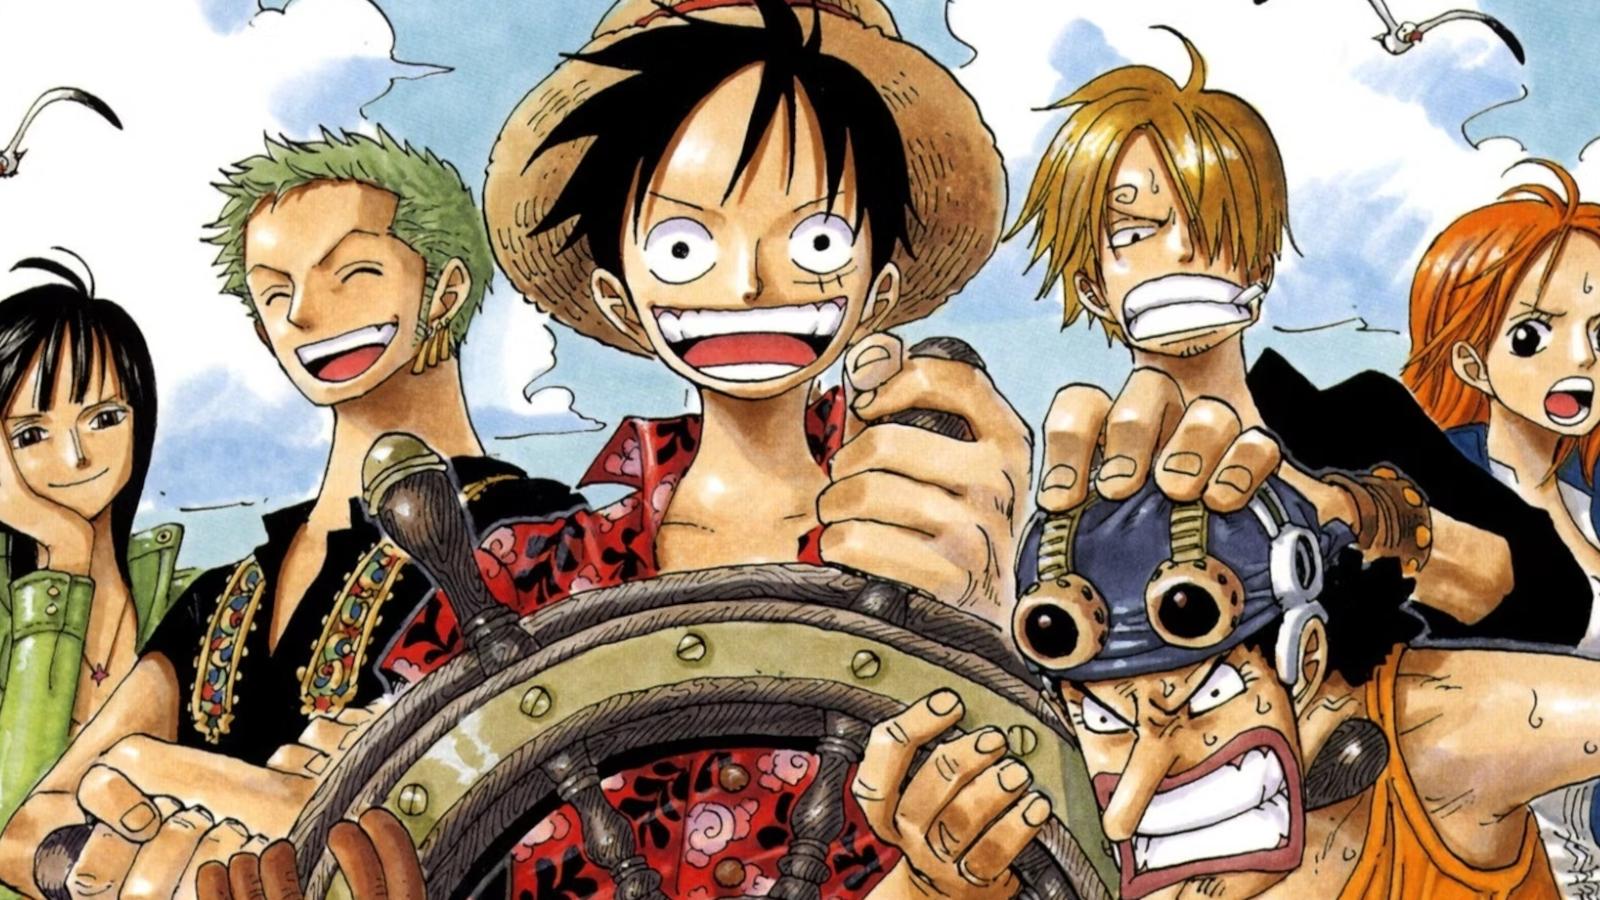 Luffy and the Straw Hats in One Piece